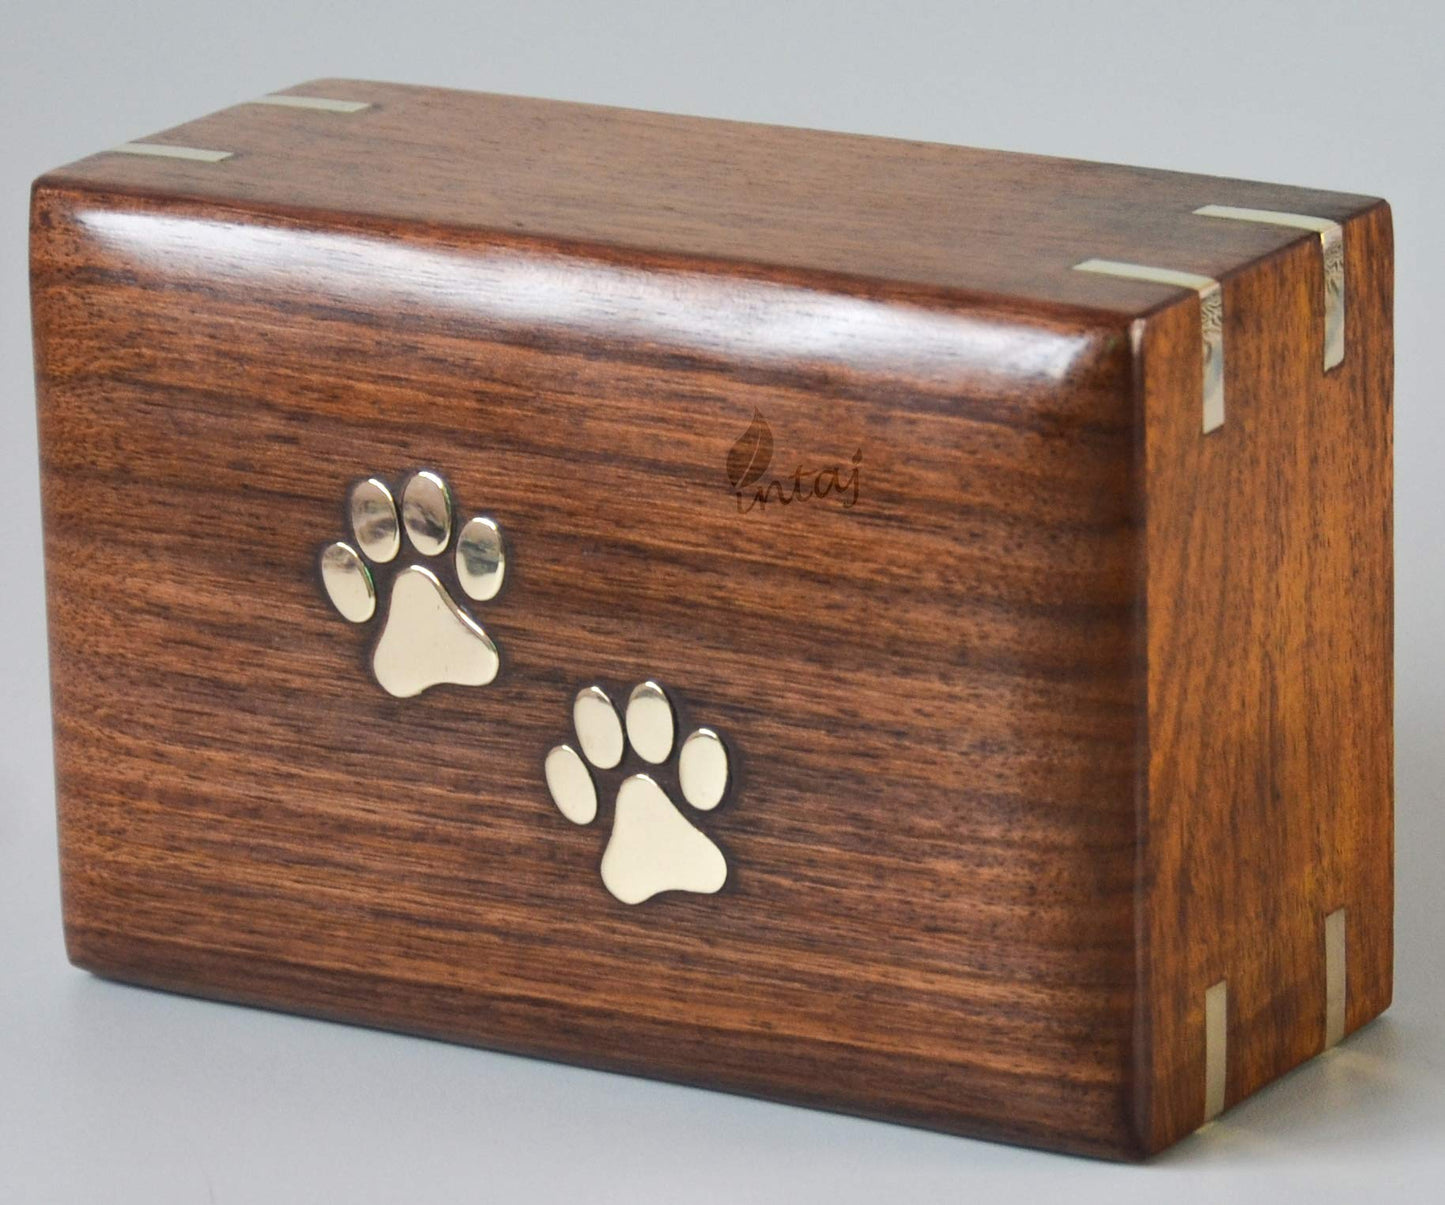 INTAJ Handmade Rosewood Pet Urns for Dogs Ashes, Wooden Urn for Ashes | Handcrafted Urns for Dogs/Cats Pets Ashes | Memorial Keepsake Funeral Urn Box (Two Paws, XS - 5x3x2)